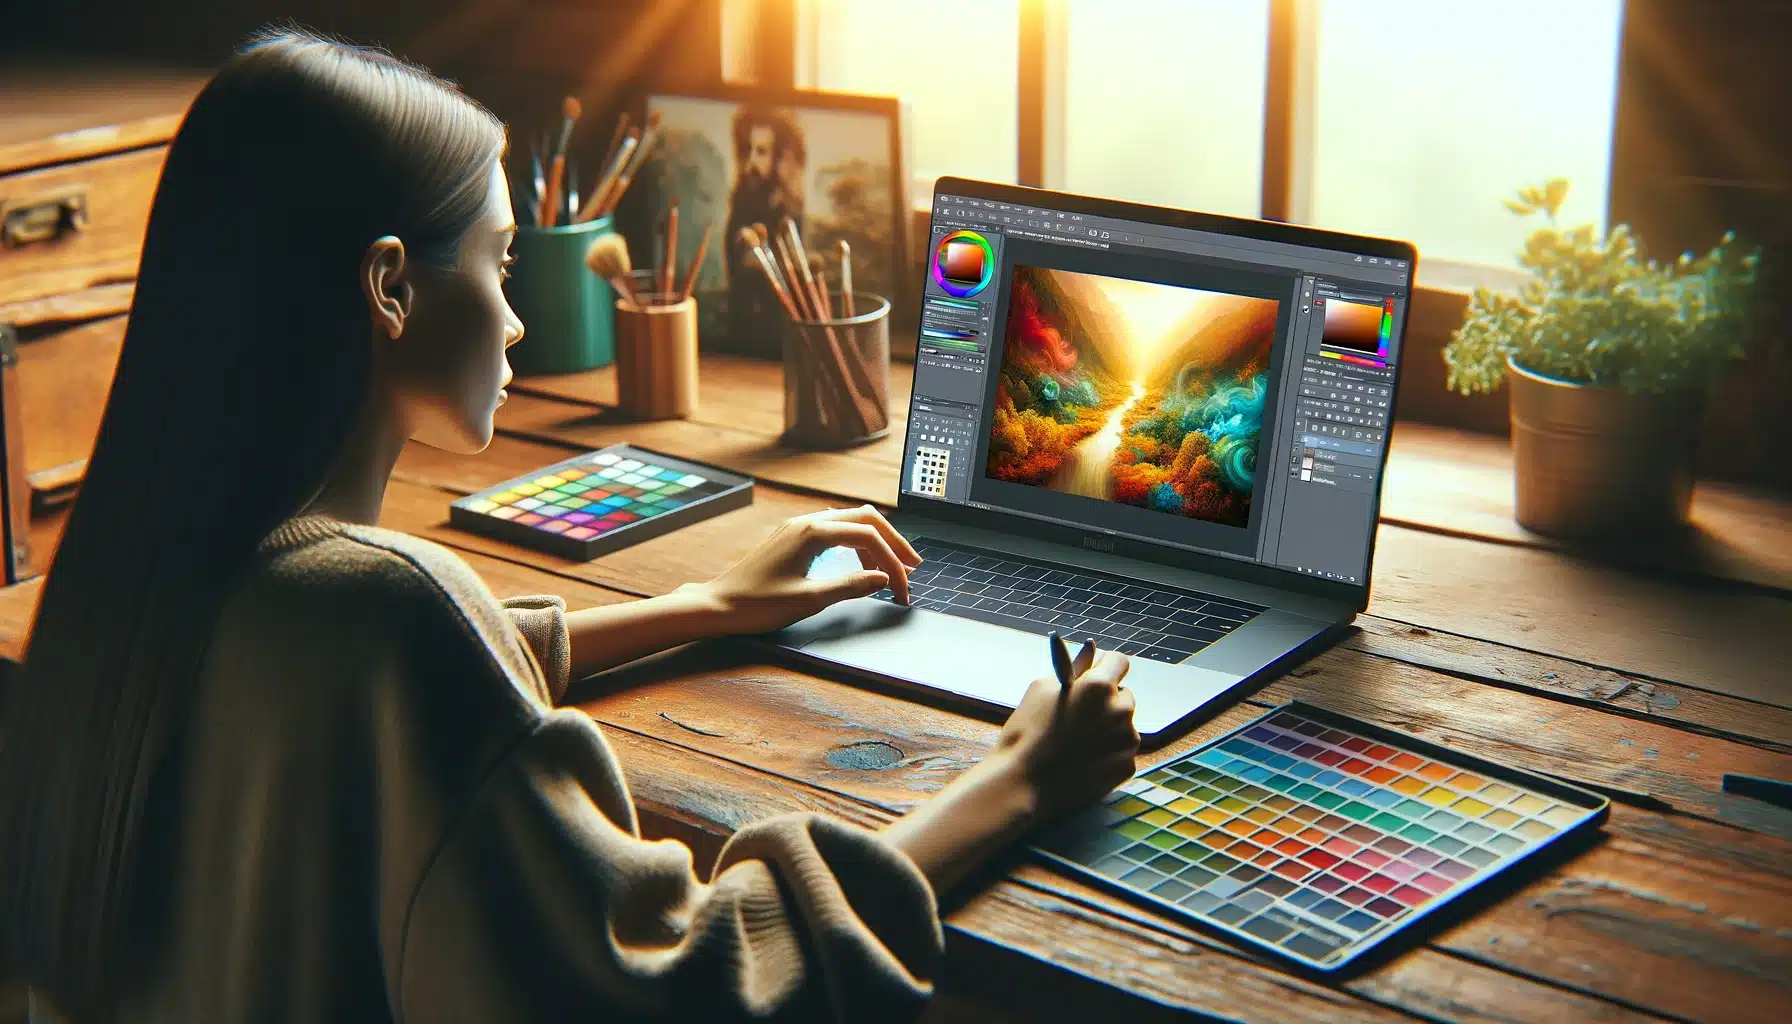 A girl sitting at a wooden desk using Adobe Photoshop on her laptop to edit a colorful landscape photo. The creative workspace is bathed in warm natural light, with a color checker and palette beside her.